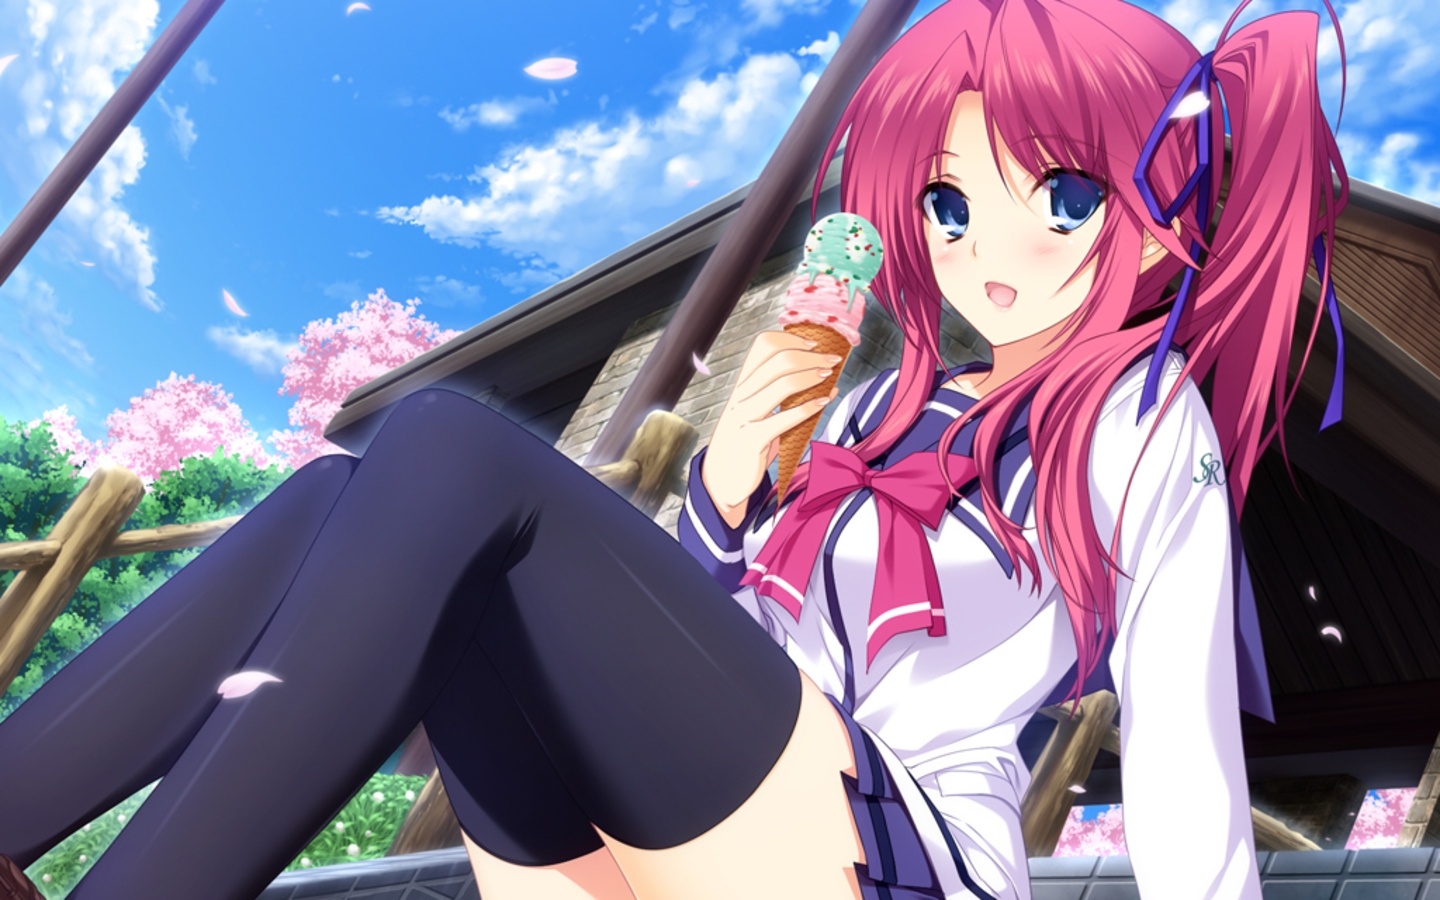 Hd Wallpapers Anime Cute Free HD Wallpapers   ImgHD Browse and